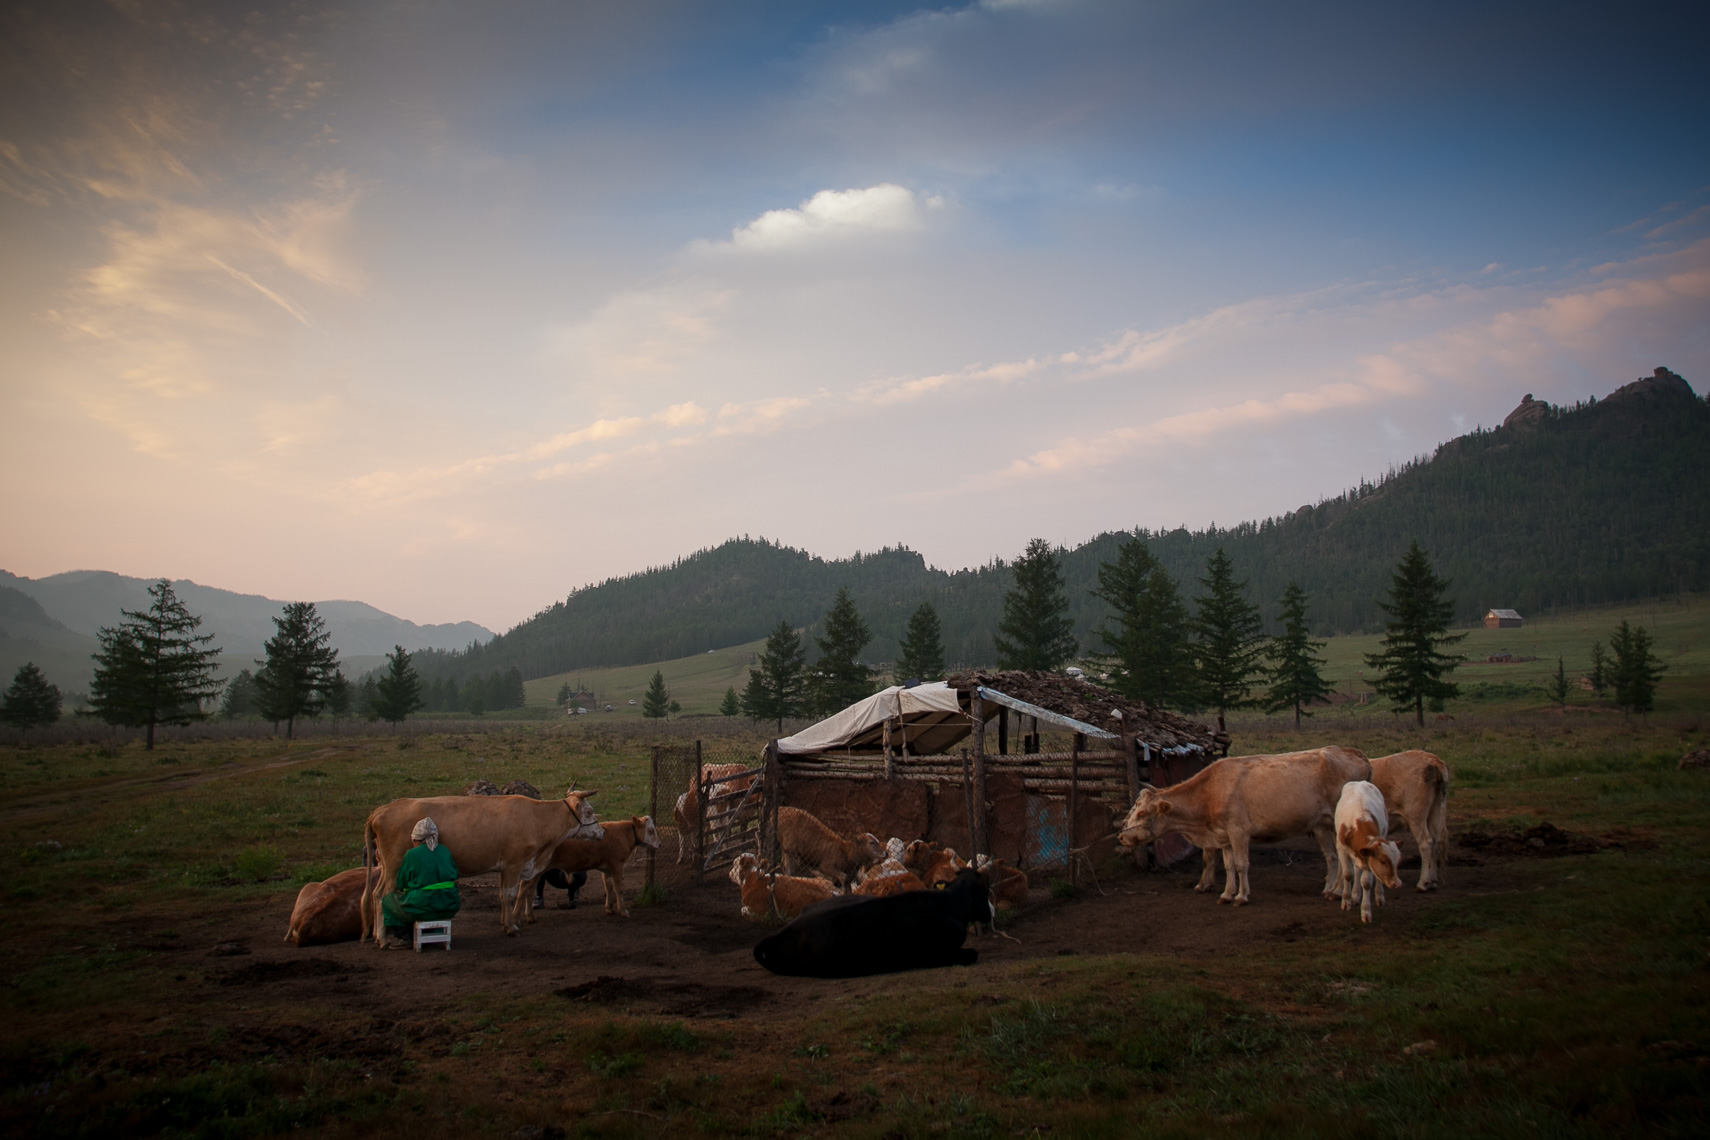 Advanced_Photo_Workshop_Mongolia_for_Rustic_Pathways_20130805_photo_by_Justin_Kase_Conder_1073